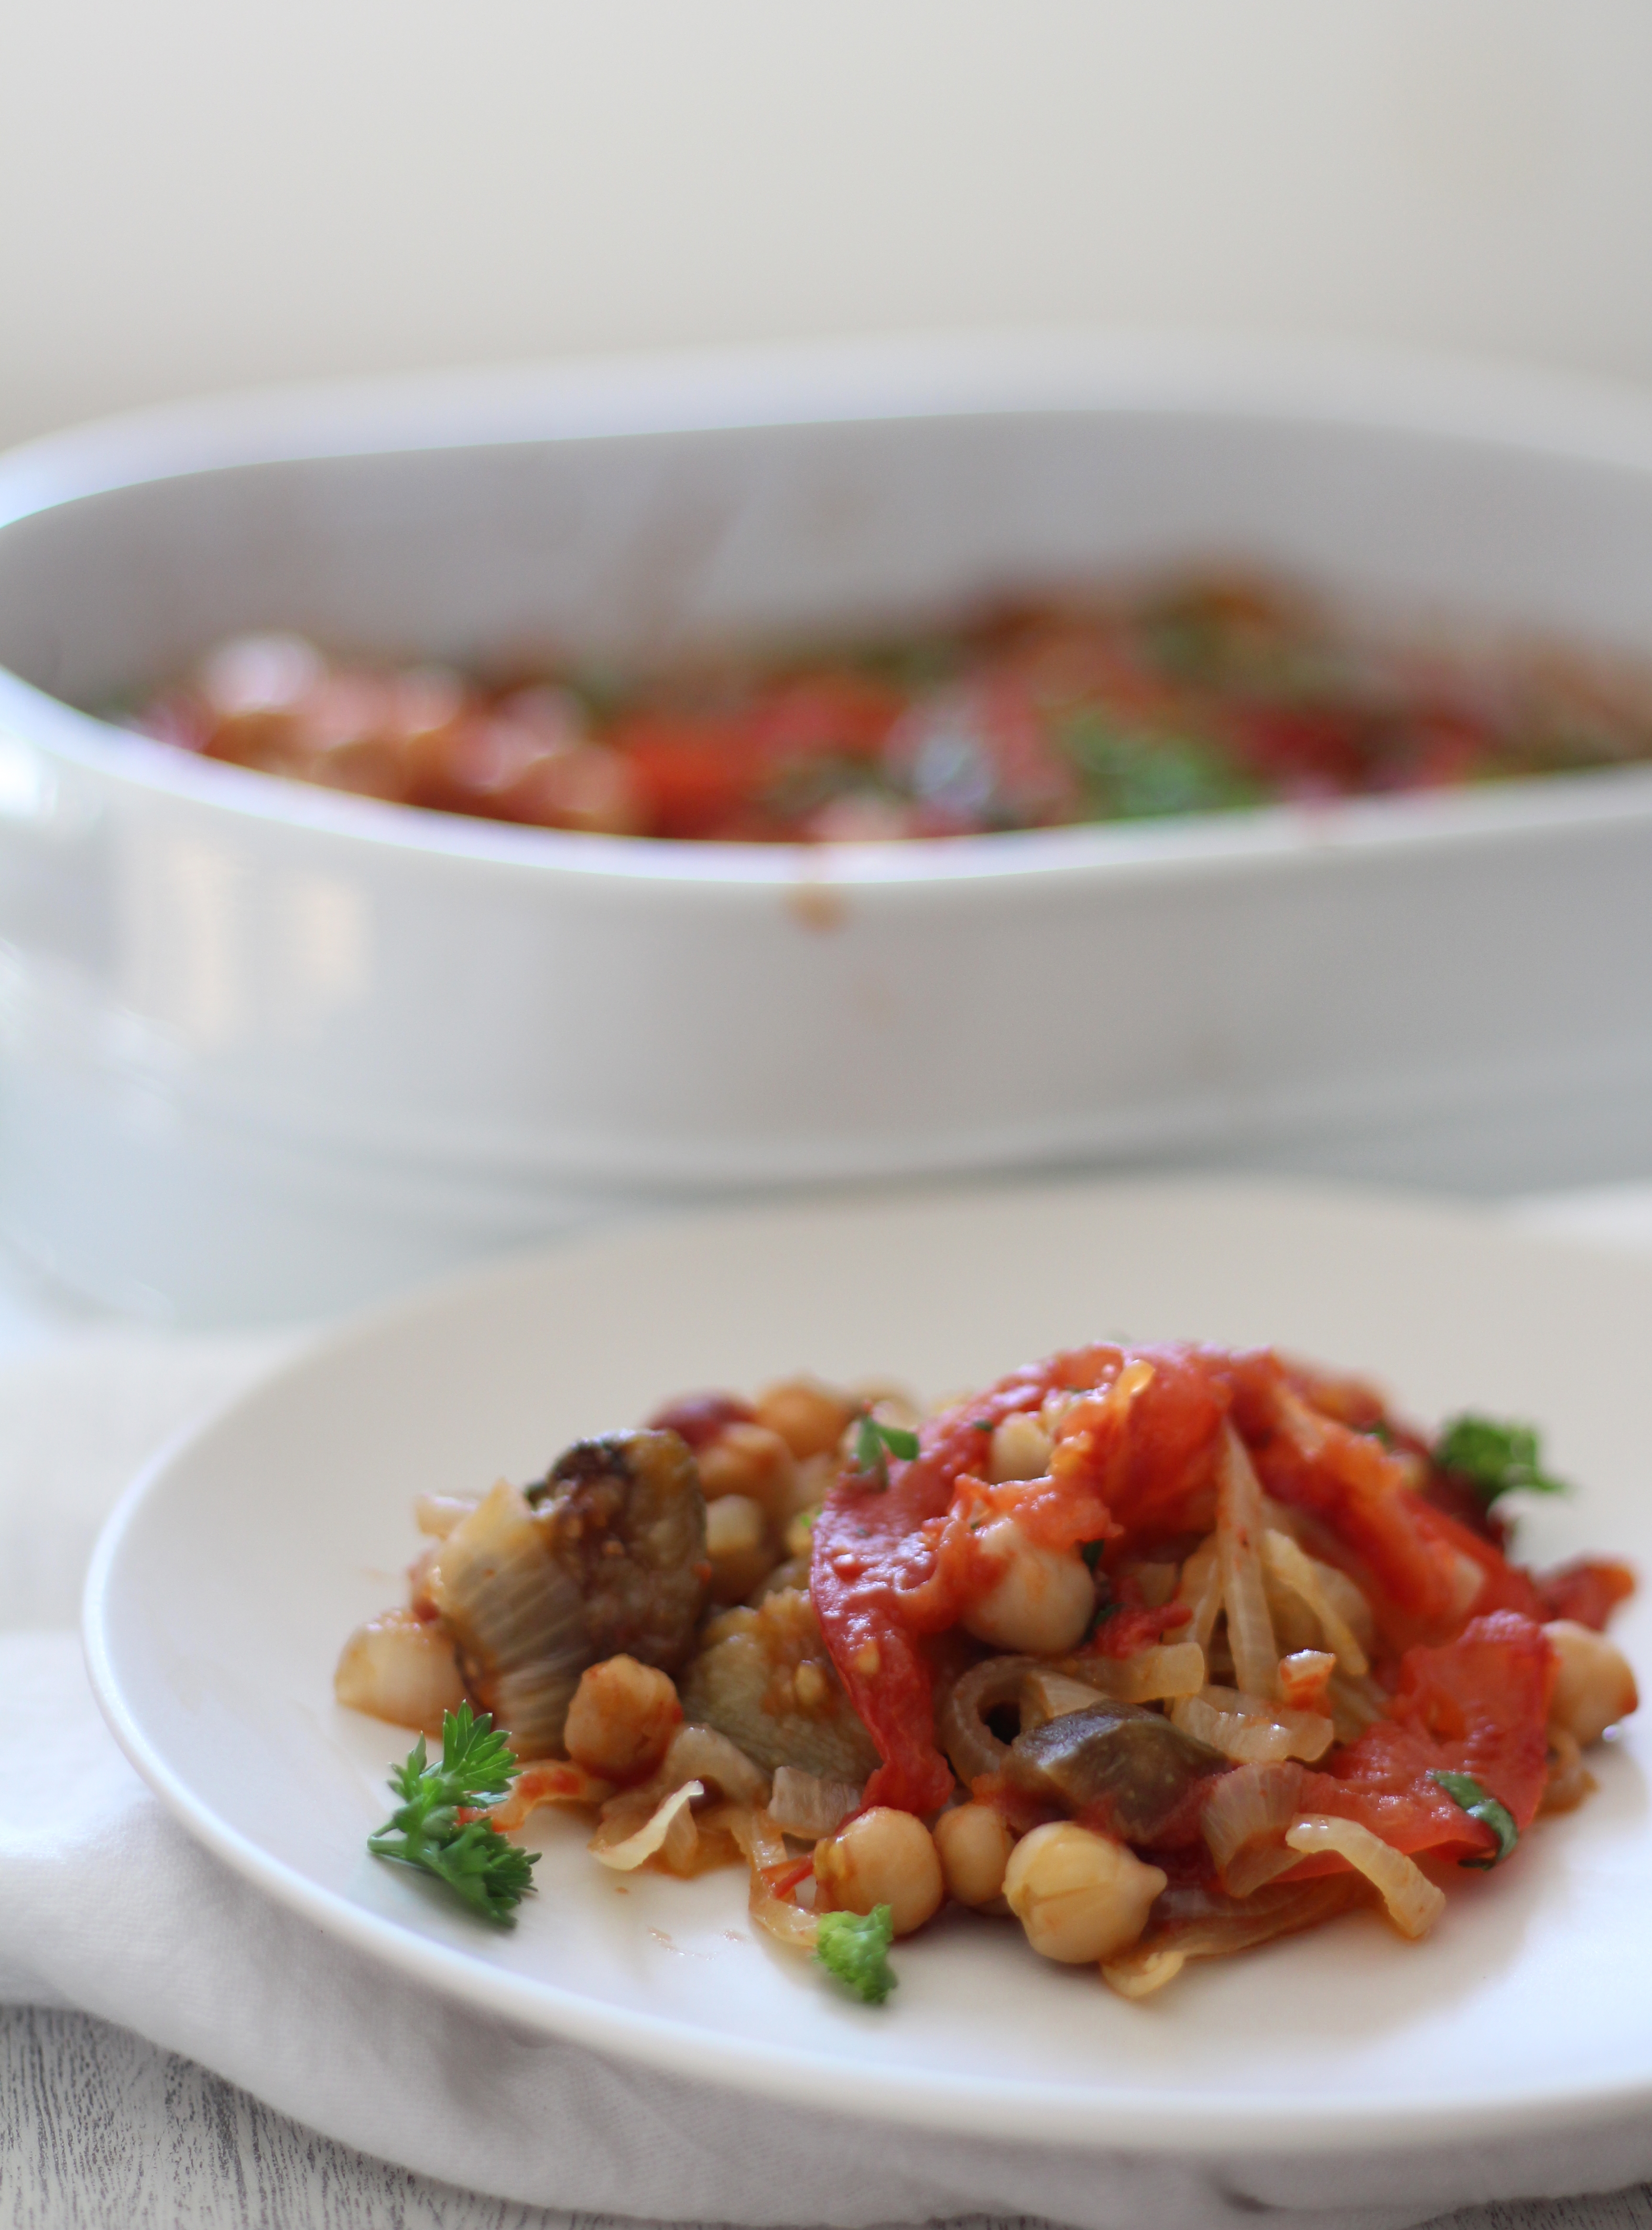 A comforting and healthy Mediterranean casserole with layers of eggplant, caramelized onions, chickpeas, and tomatoes - and simple to prepare!